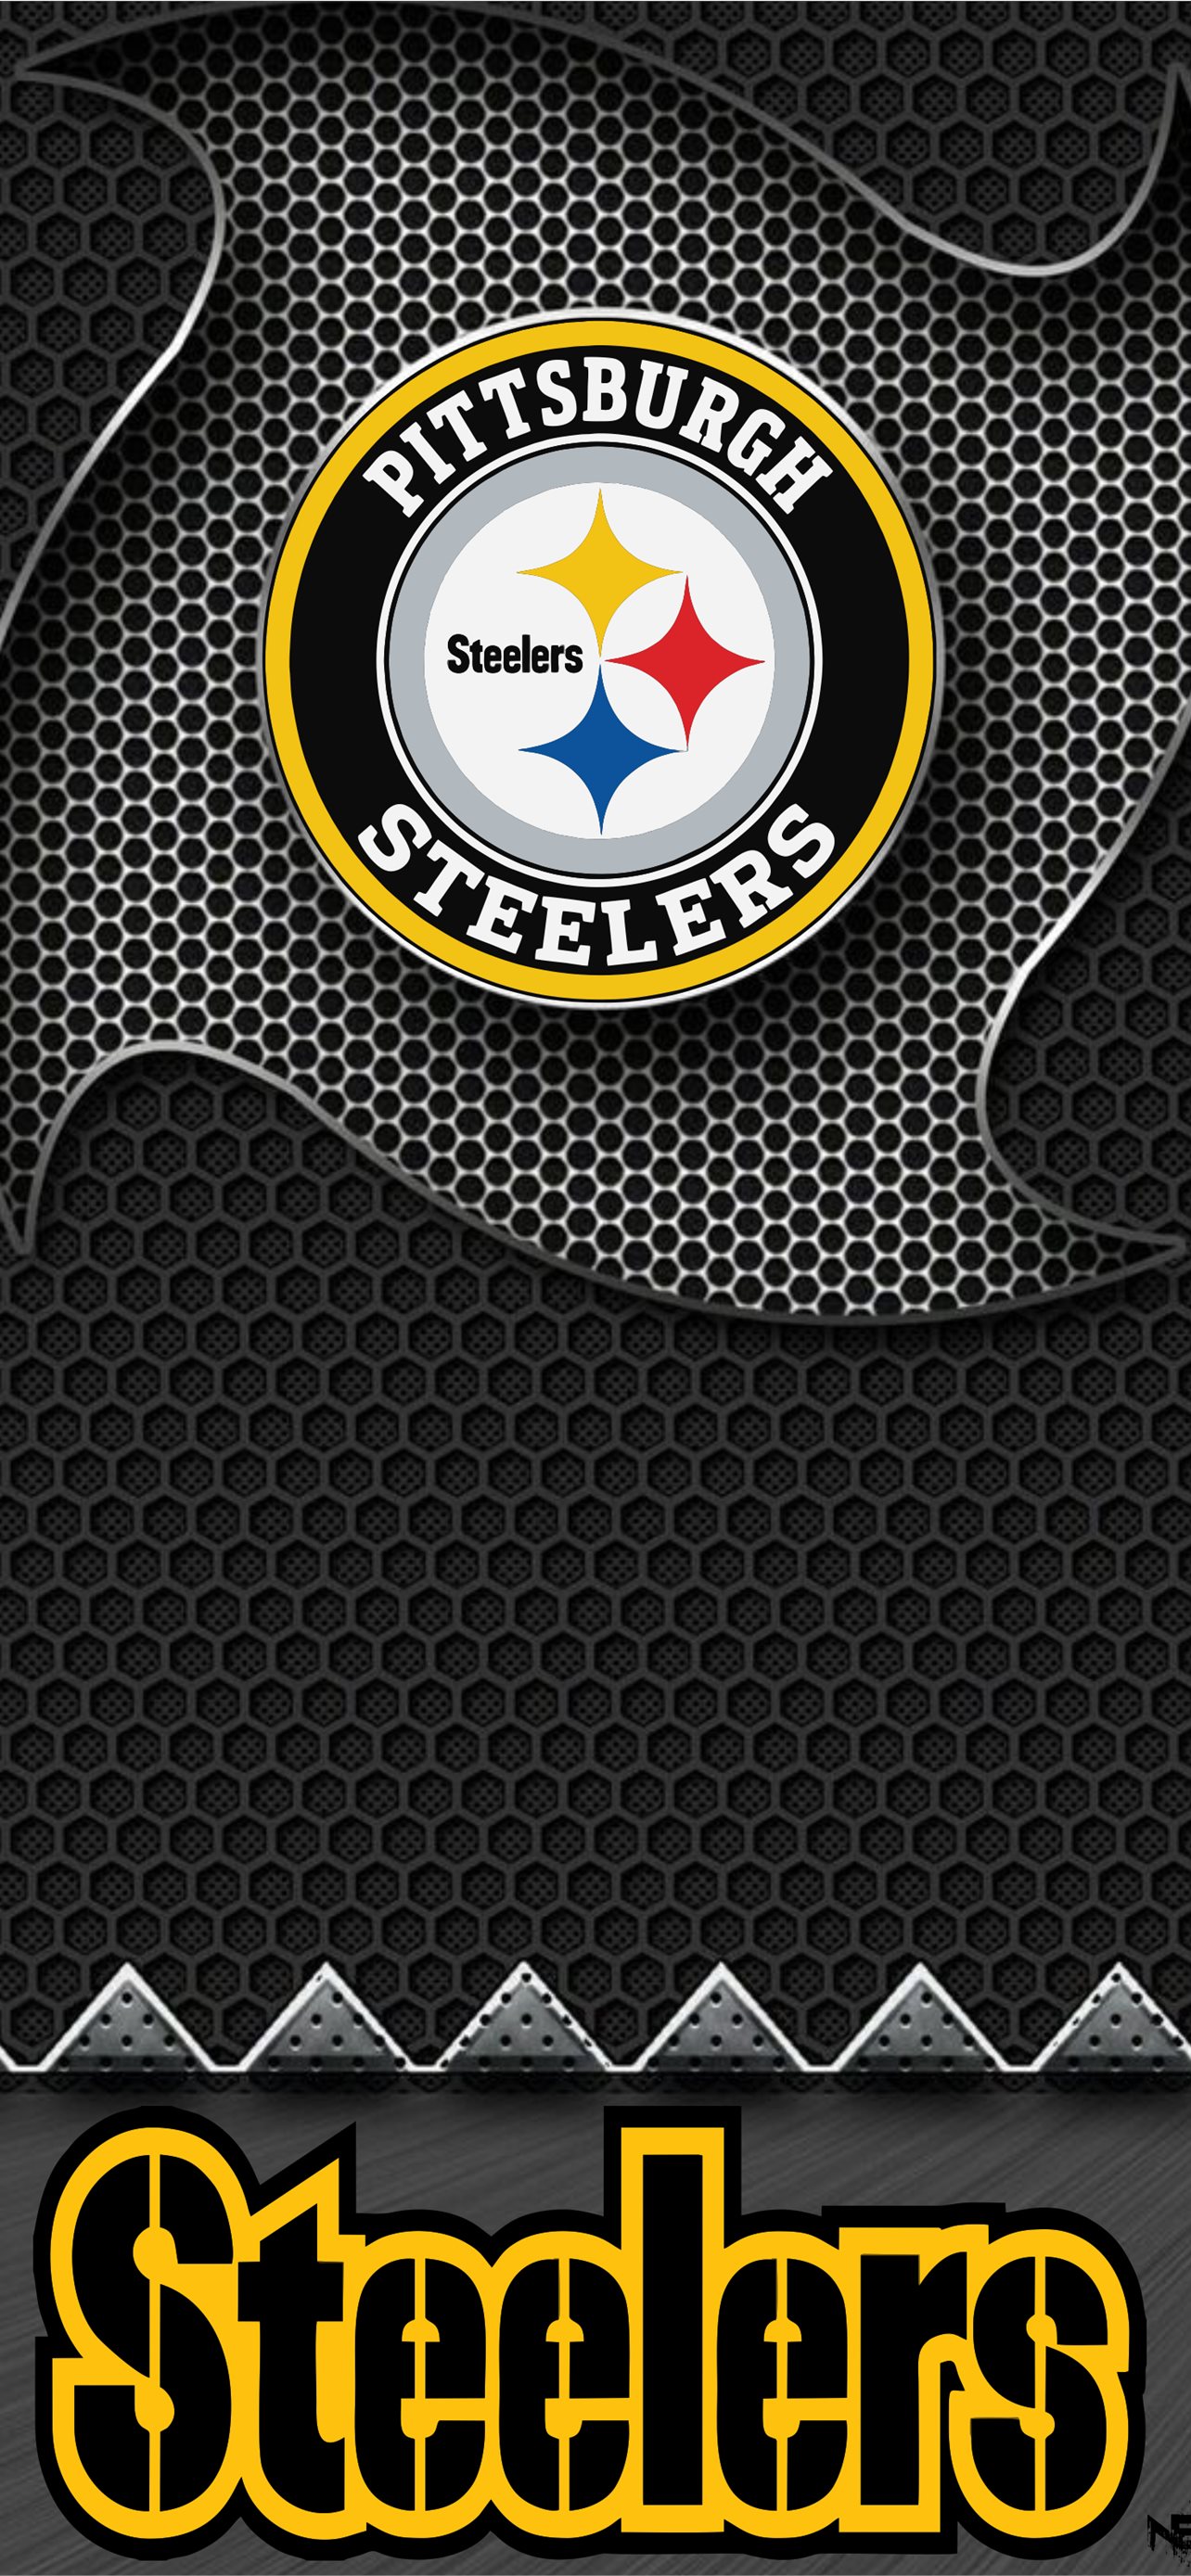 Download The Color of Success  Gold Pittsburgh Steelers Wallpaper   Wallpaperscom